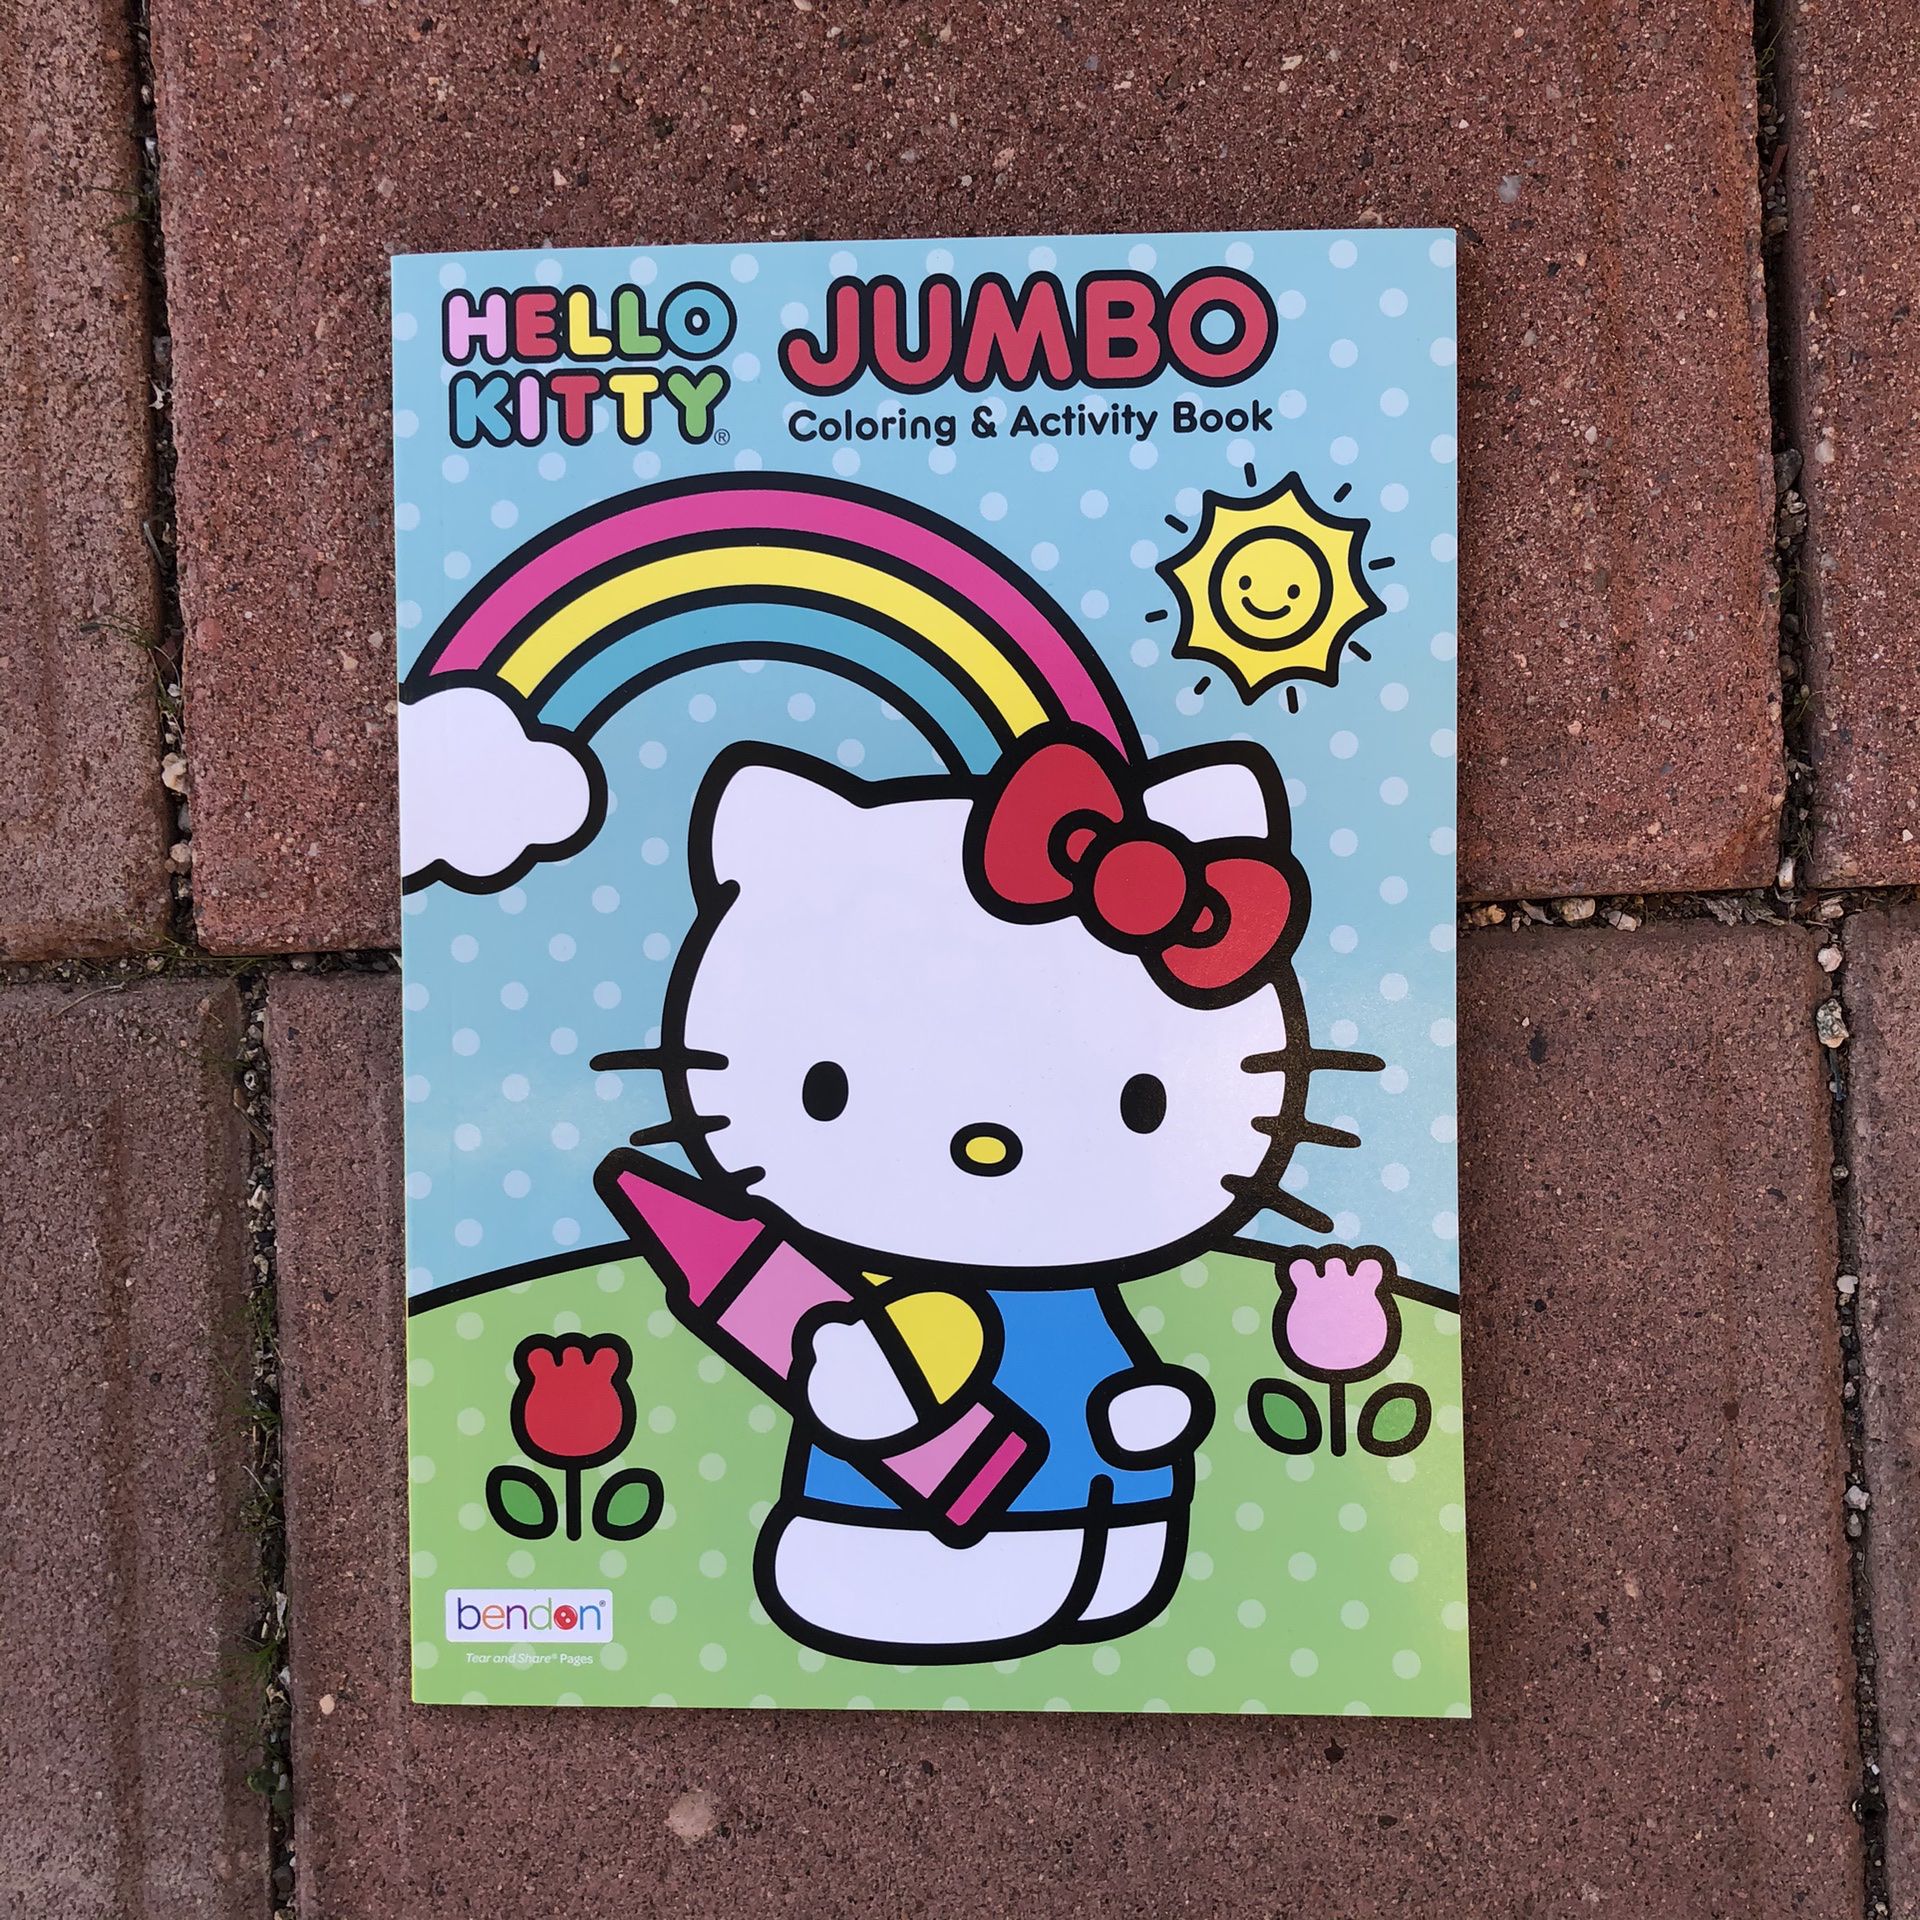 NWOT Sanrio Hello Kitty Coloring Book for Sale in Tucson, AZ - OfferUp